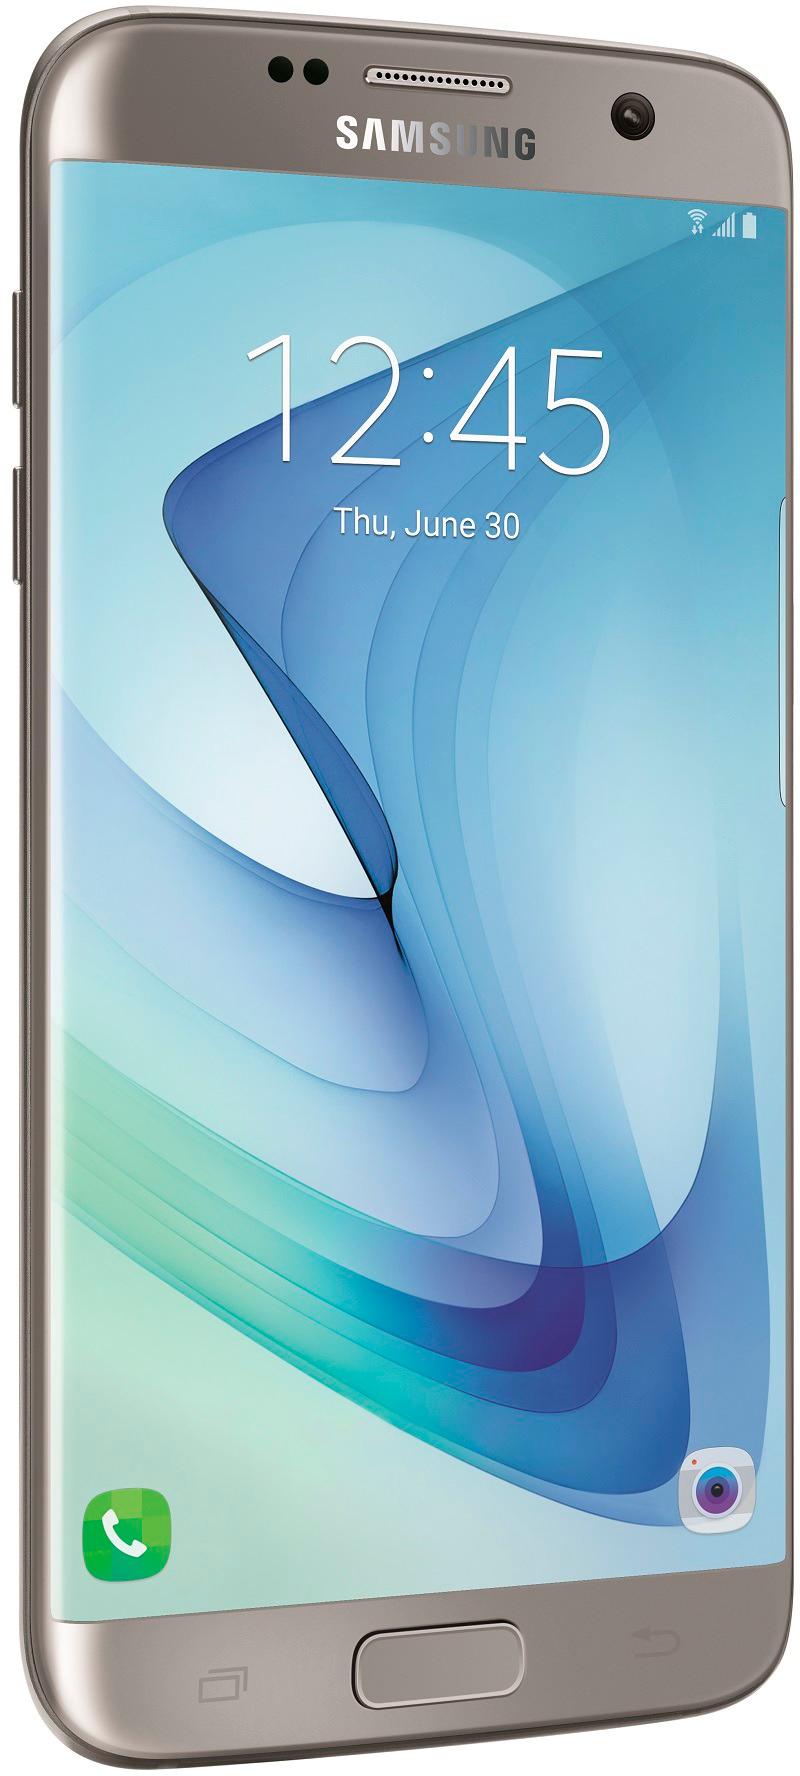 Angle View: Samsung - Pre-Owned Galaxy S7 edge 4G LTE with 32GB Memory Cell Phone (Unlocked) - Titanium Silver